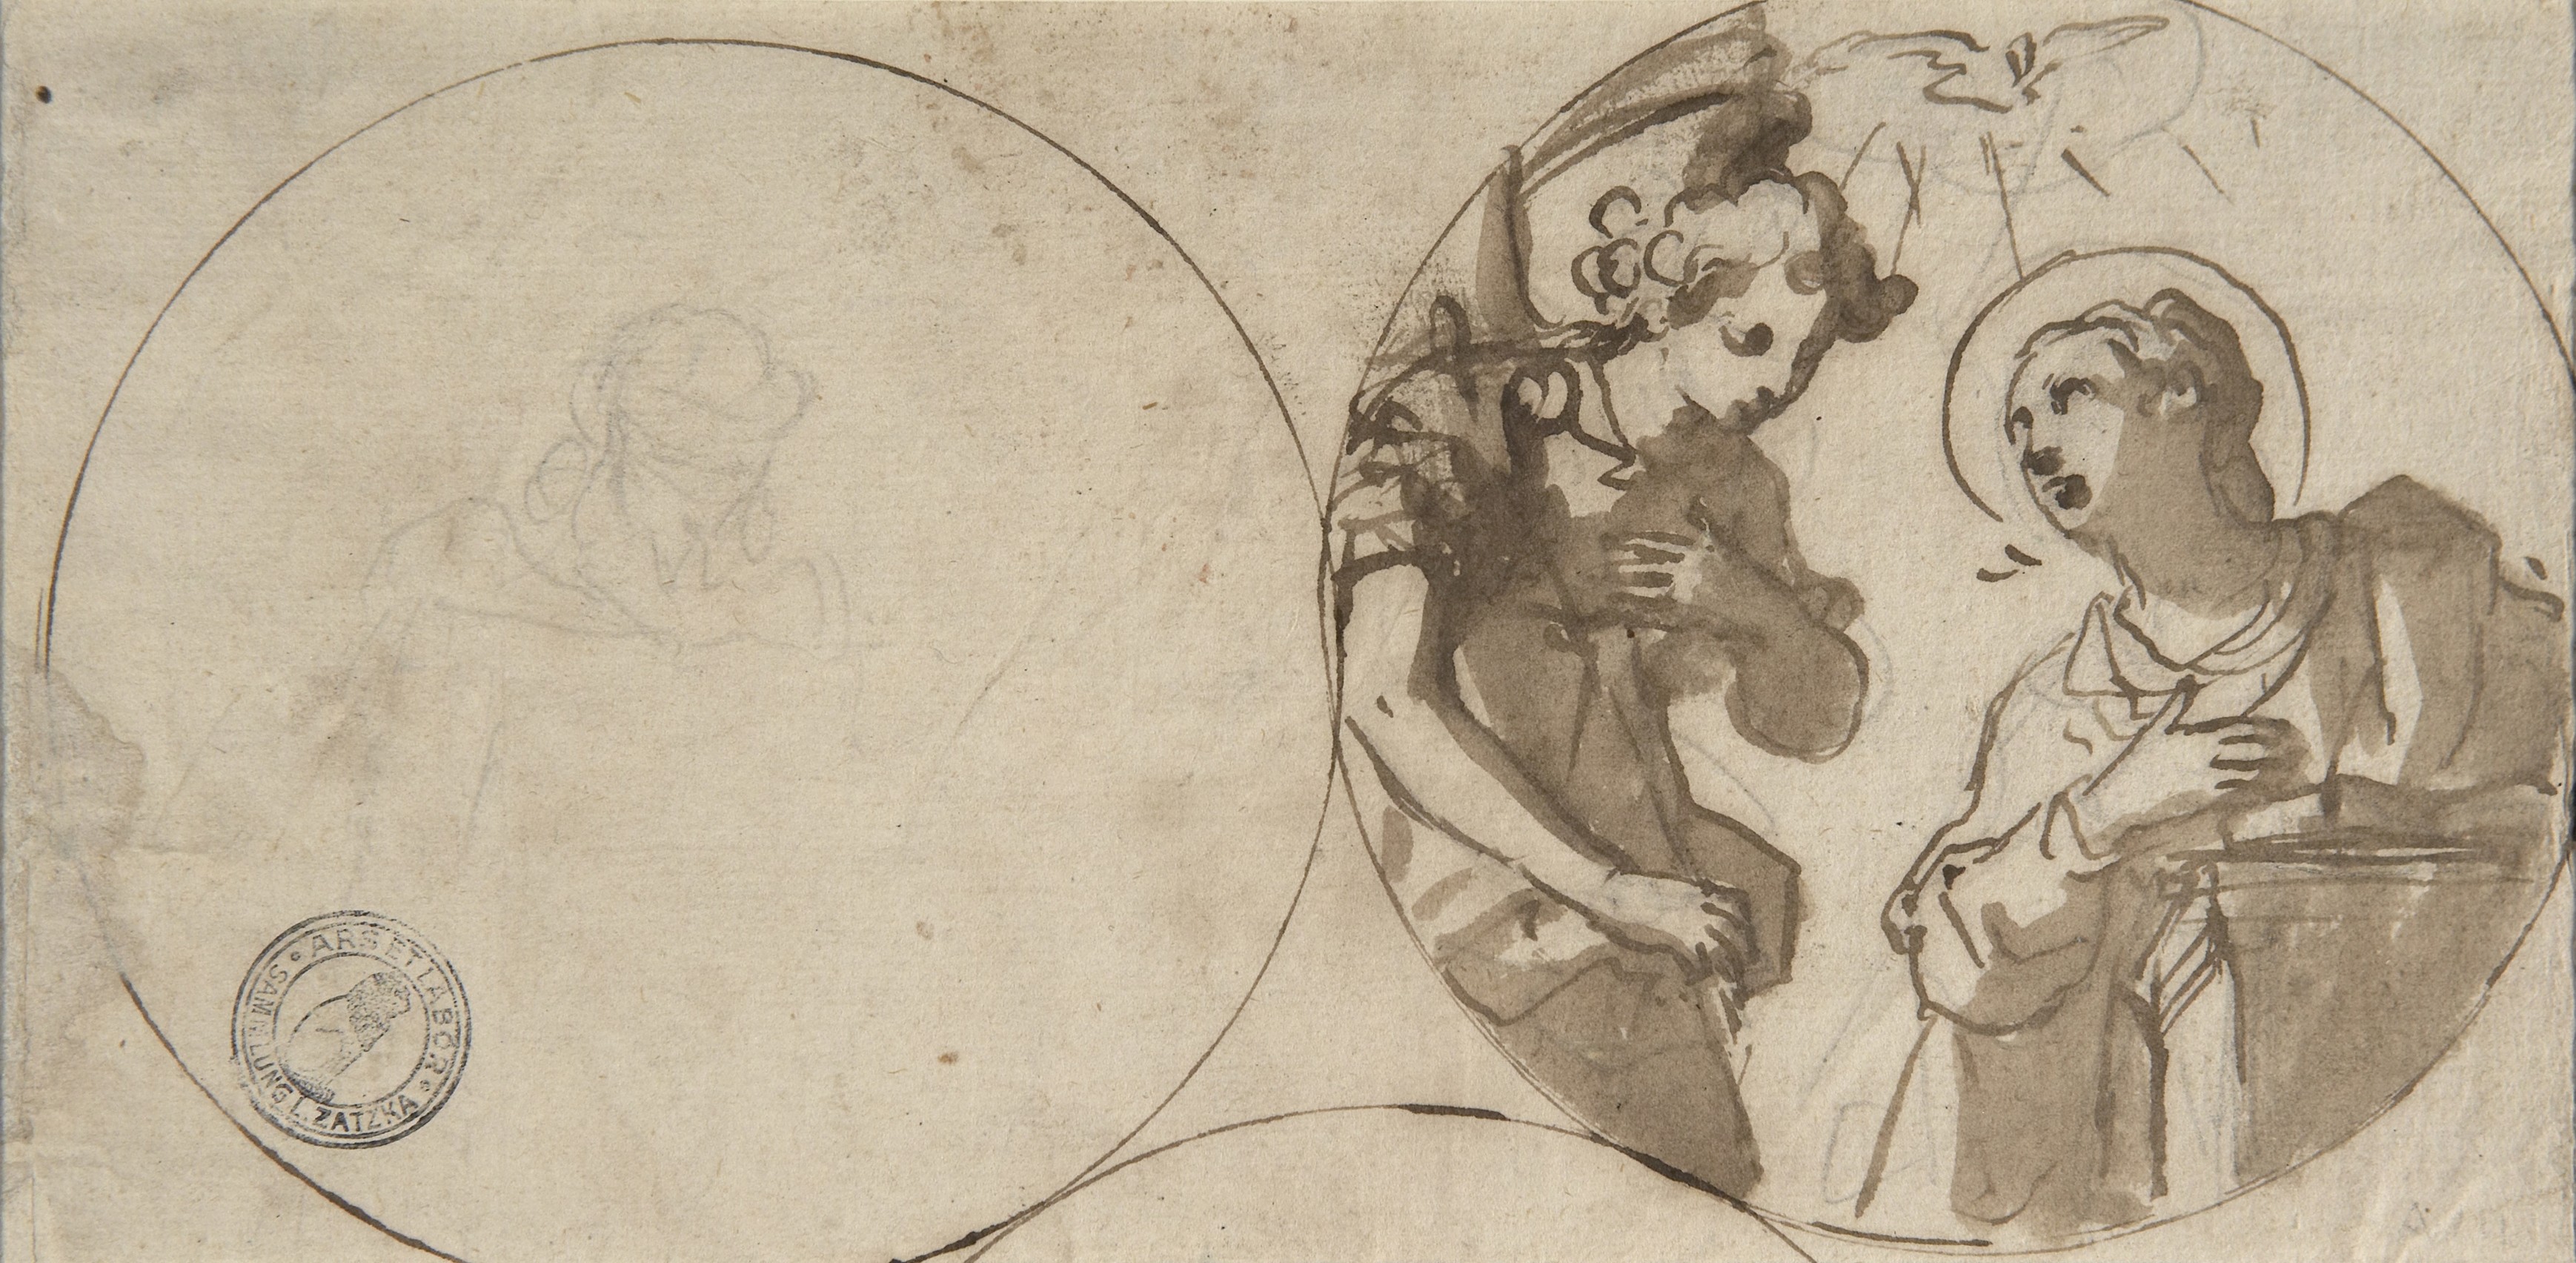 Annunciation and Partial Sketch of Figure (2002-81)